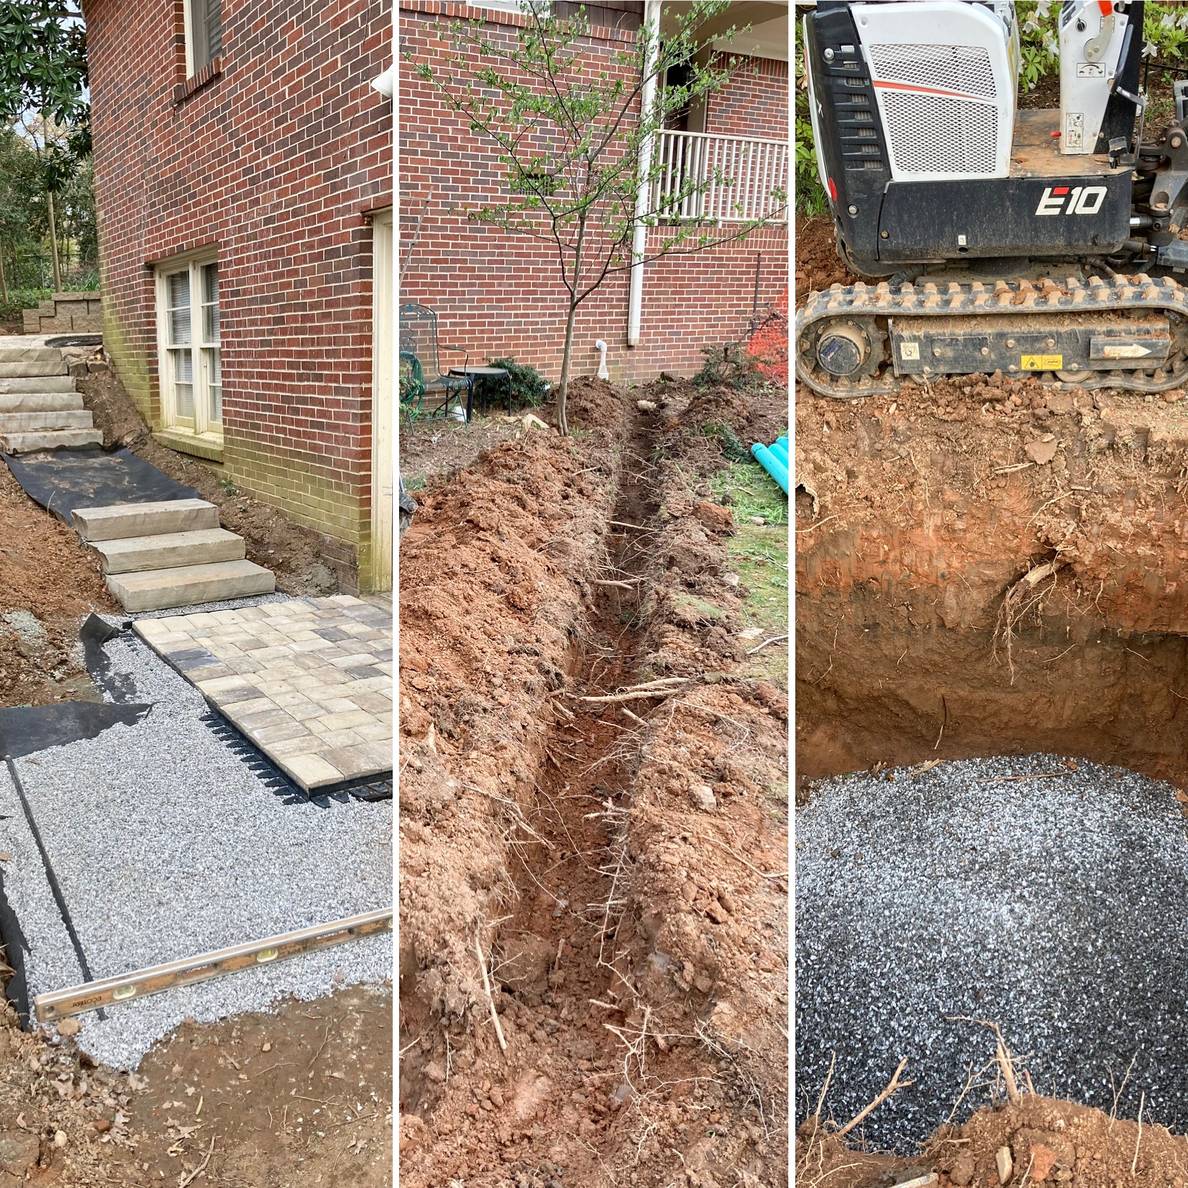 3 photos: one is some stone treads with a paver landing by a basement door; one is of a pit with crushed stone at the bottom; the third is of a trench dug through a yard.